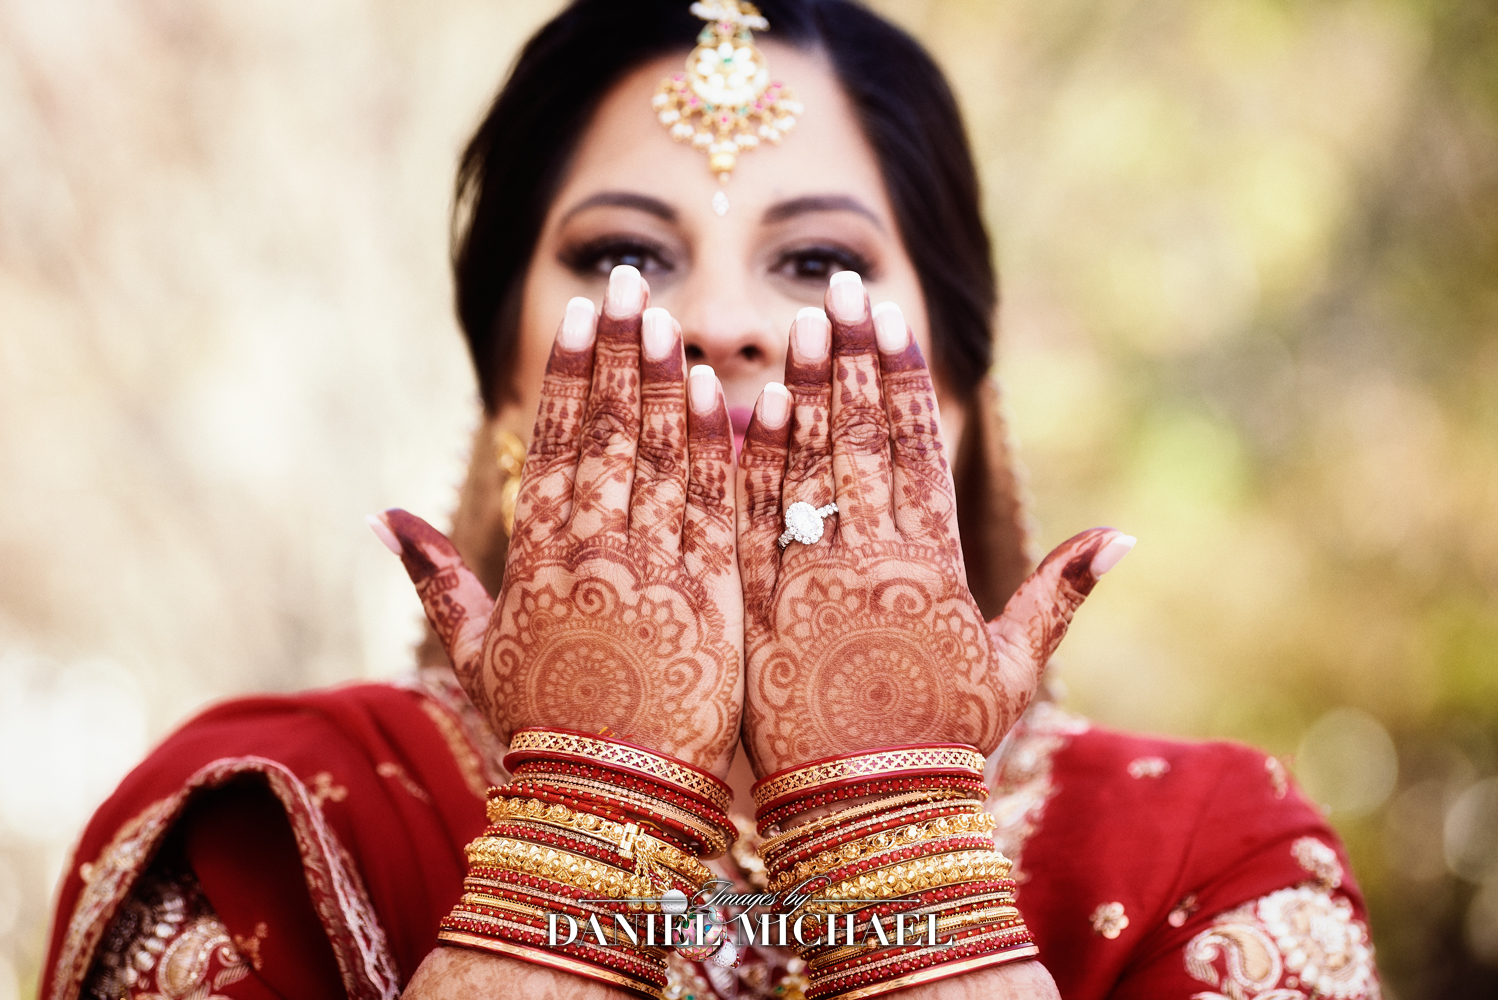 Bride with intricate henna designs on her hands during an Indian wedding ceremony